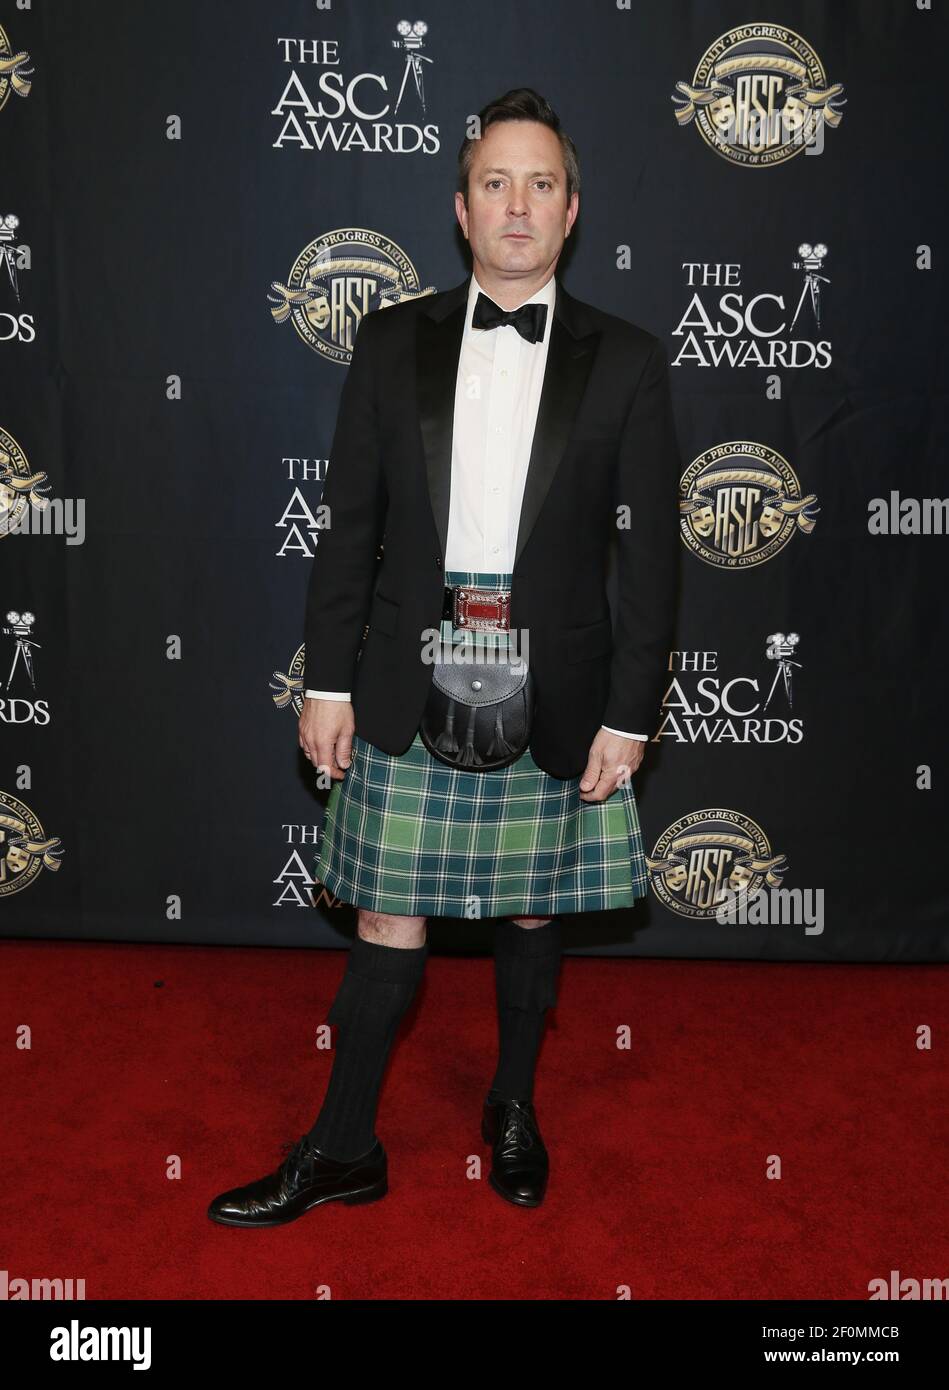 Actor Thomas Lennon poses at the 33rd annual ASC Awards and The American Society of Cinematographers 100th Anniversary Celebration at the Ray Dolby Ballroom at Hollywood & Highland, Saturday, February 9, 2019 in Hollywood, California. (Photo by Danny Moloshok/imageSPACE / SIPA USA) Stock Photo